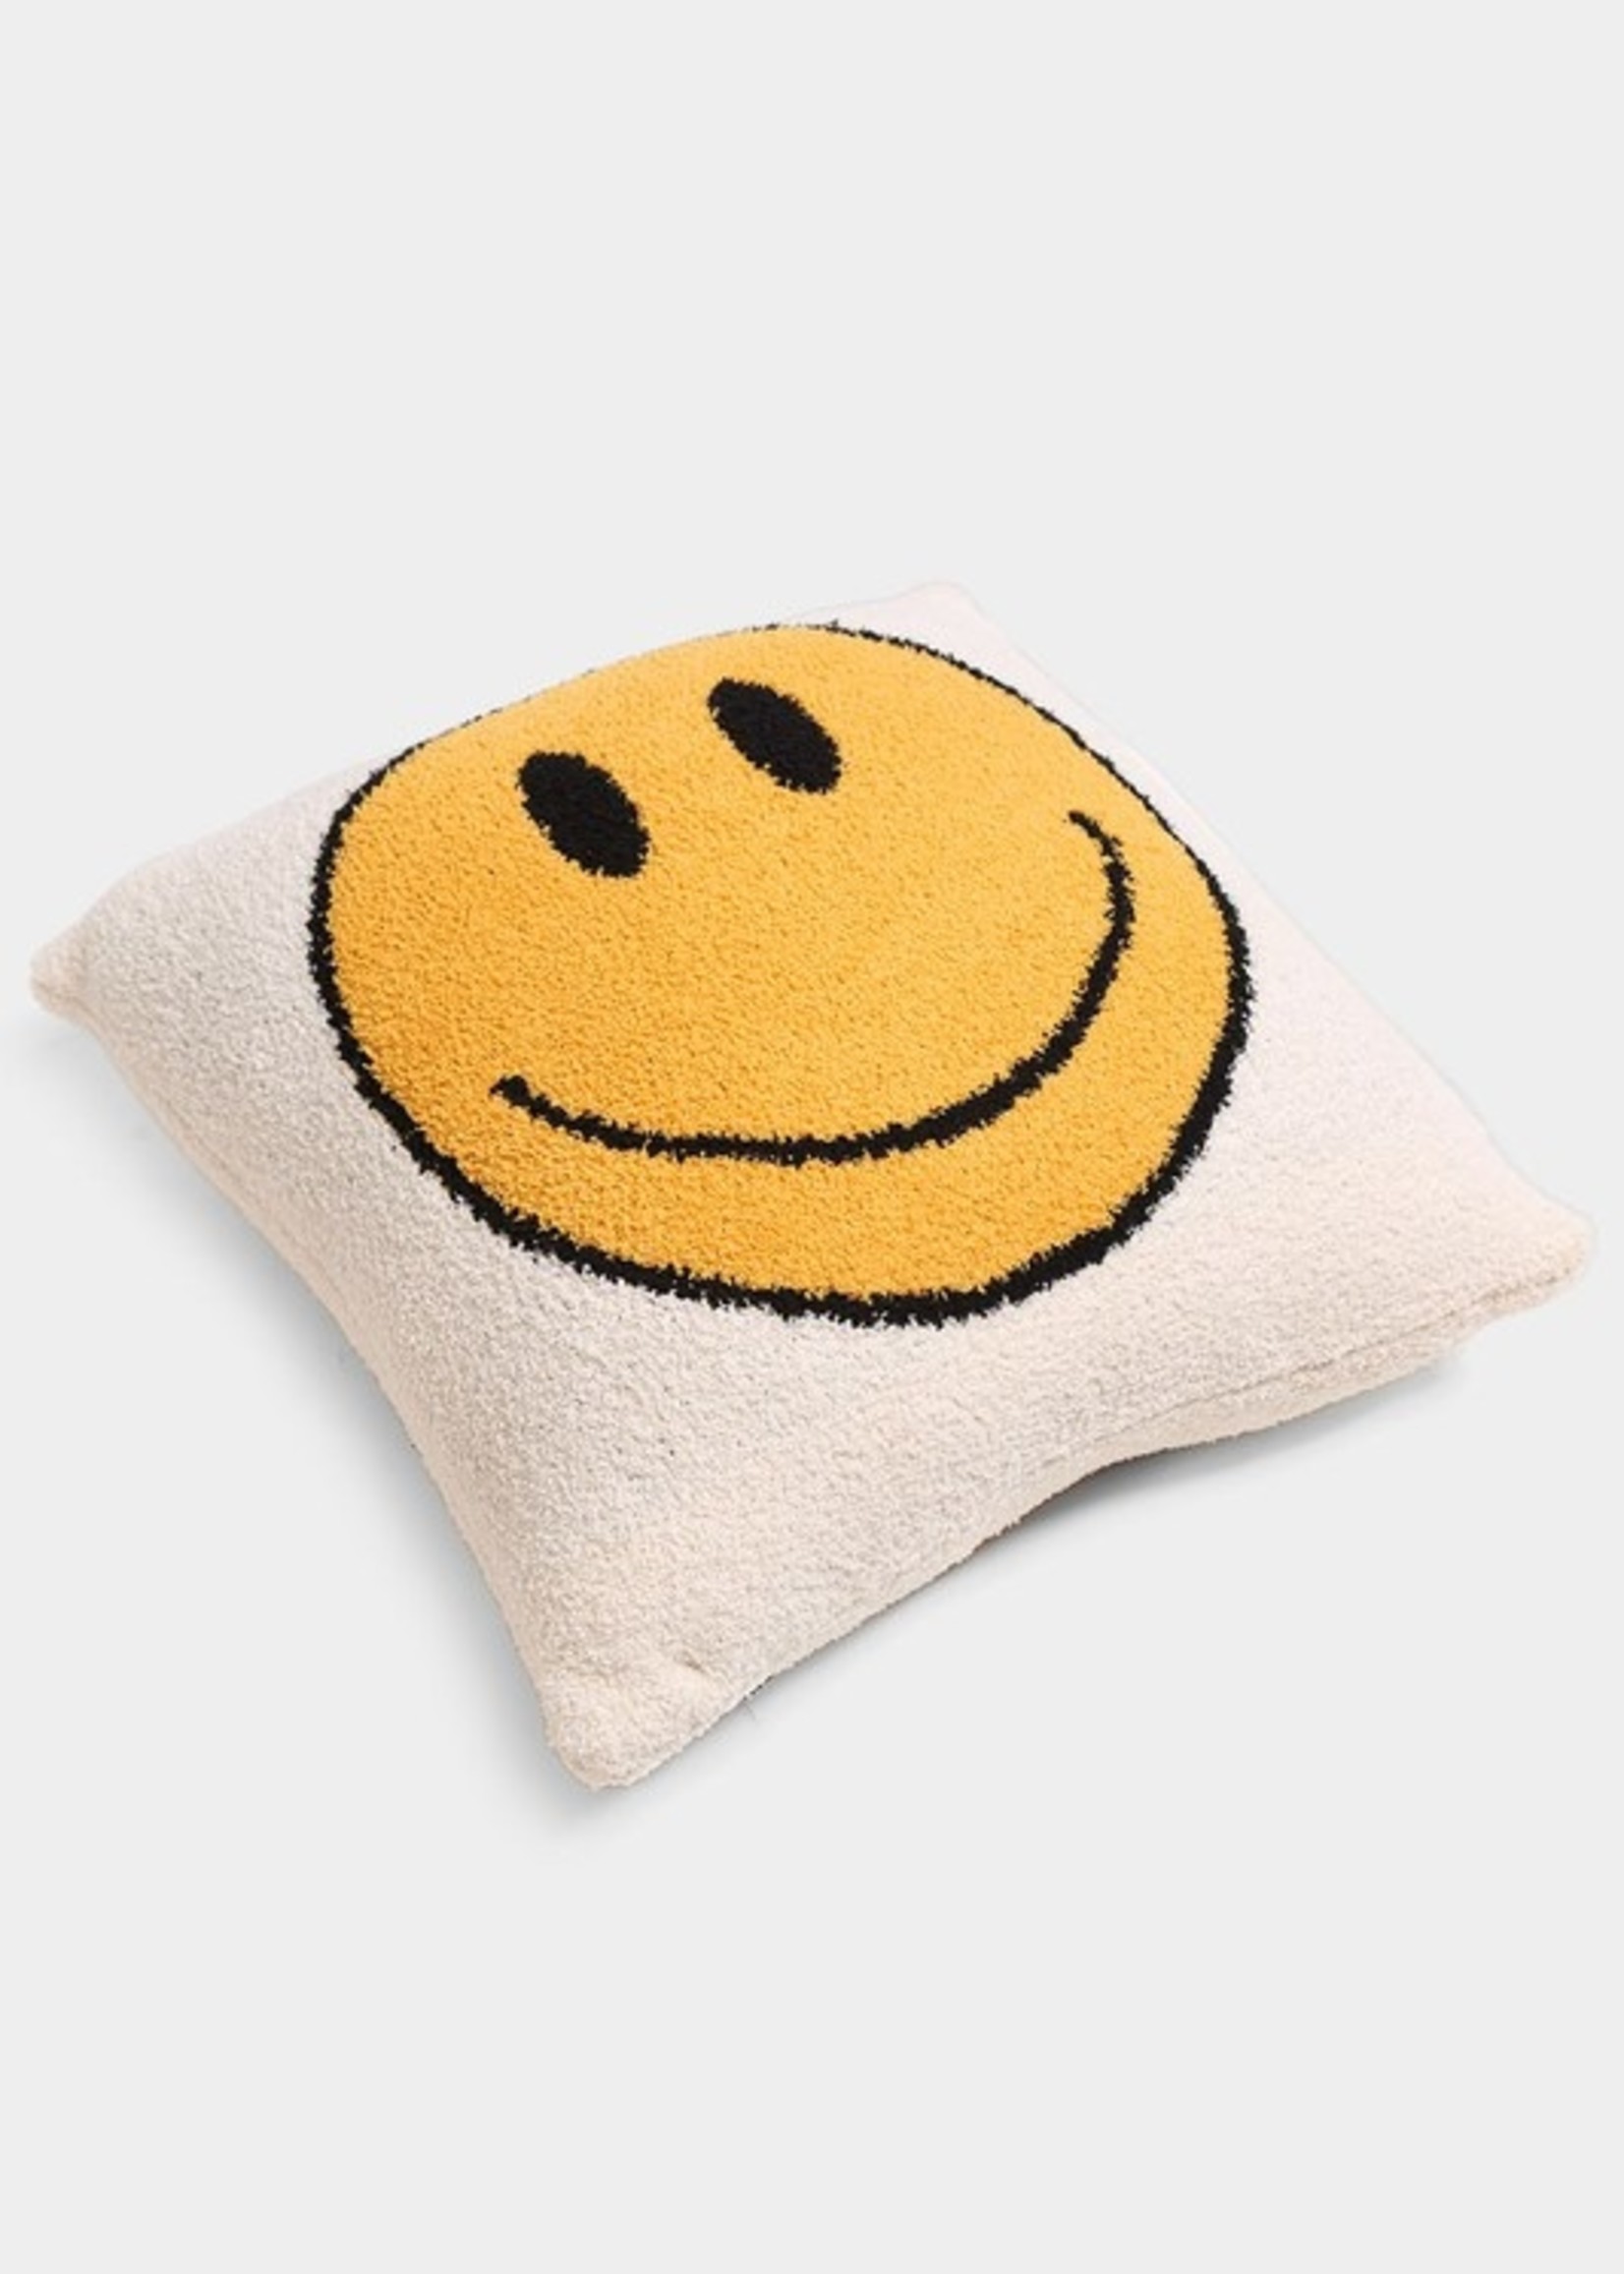 wona trading Smiley Pillow Cushion Cover